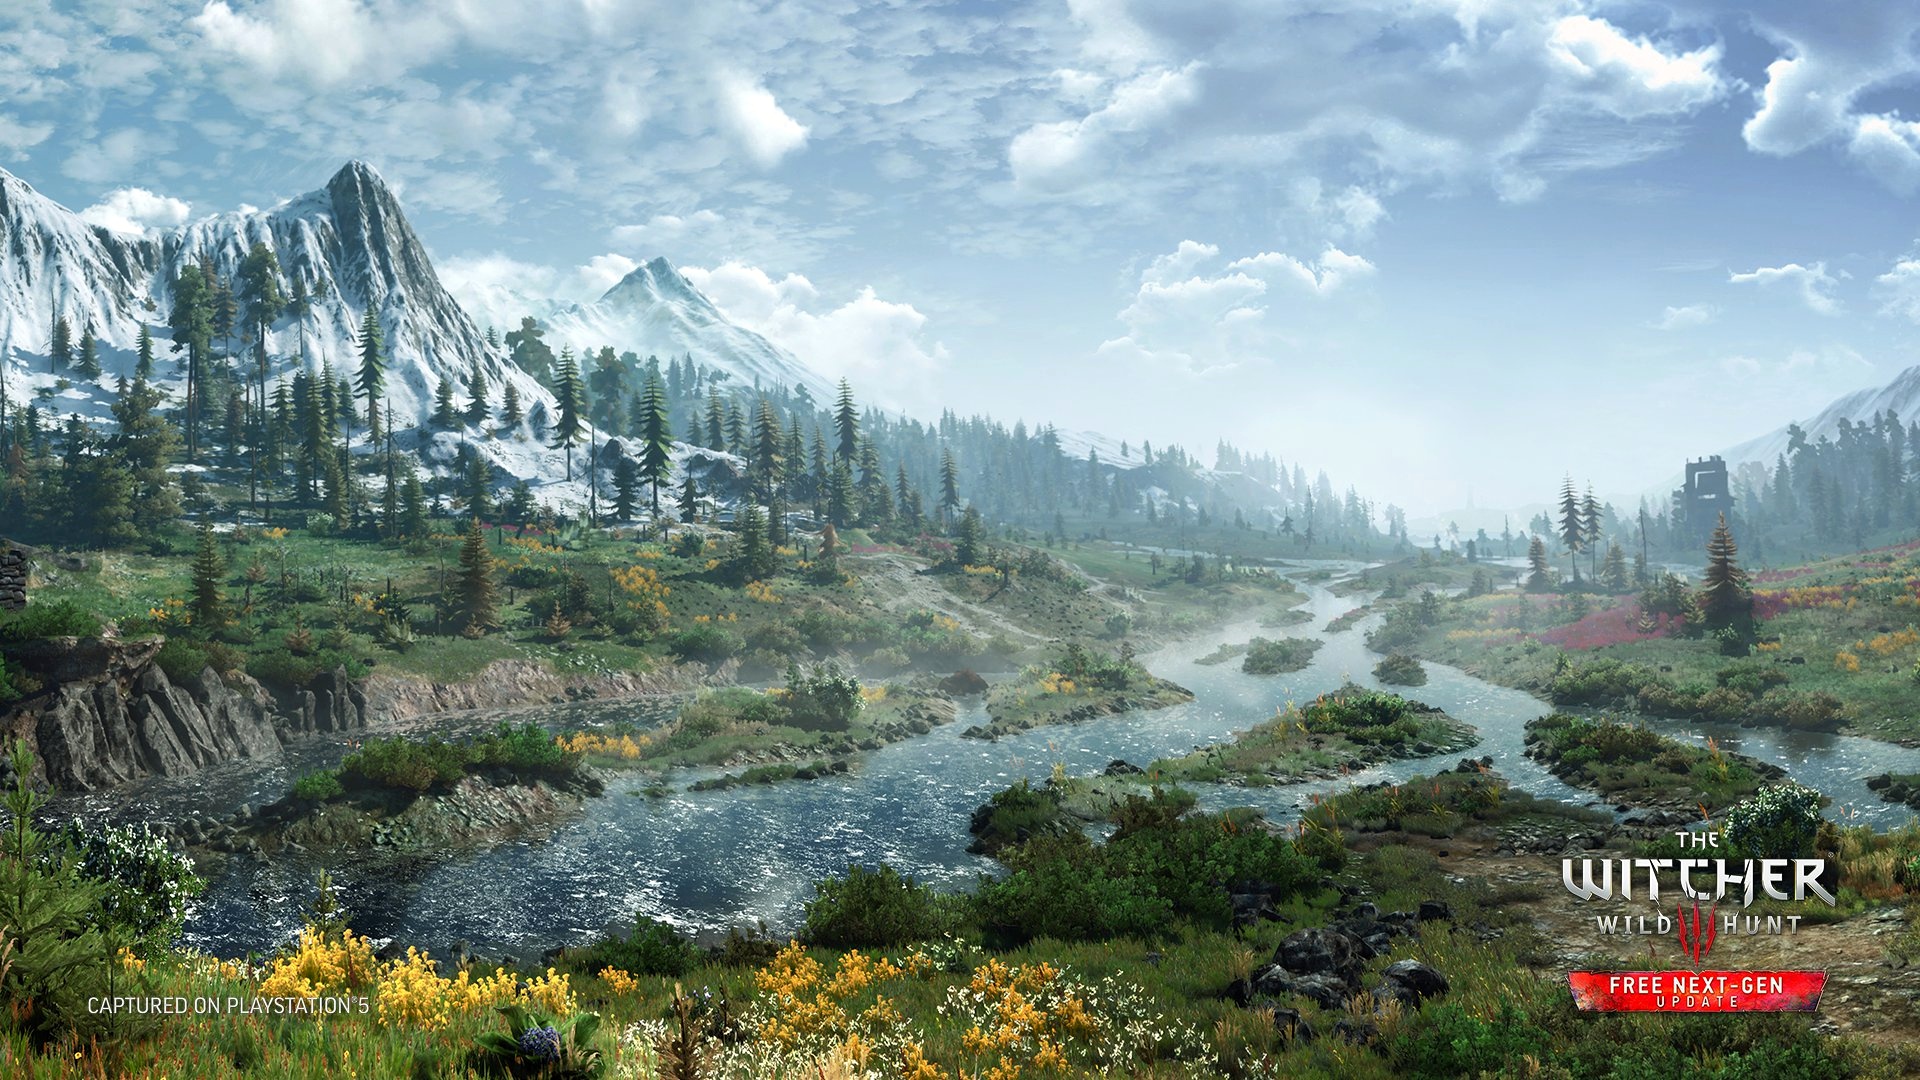 The witcher 3 last patch фото 16